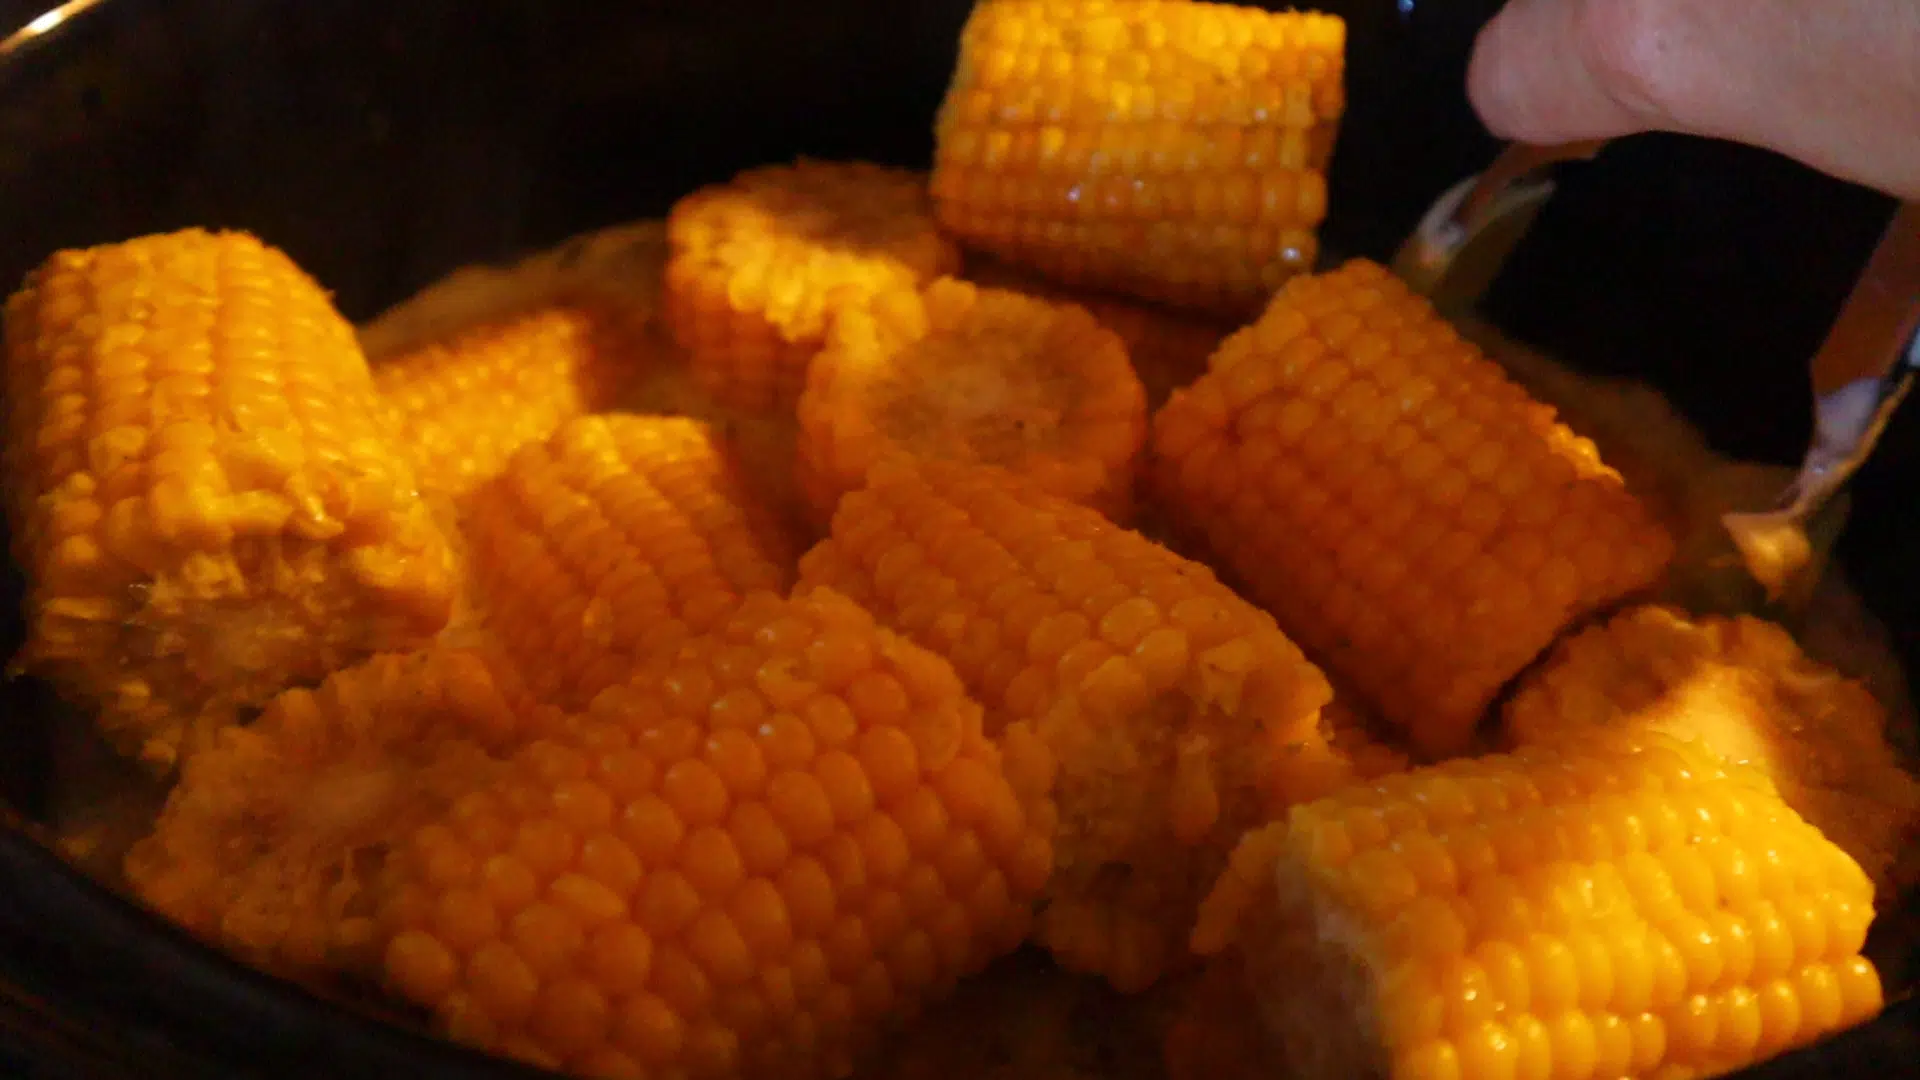 The Easiest Way to Make Corn on the Cob